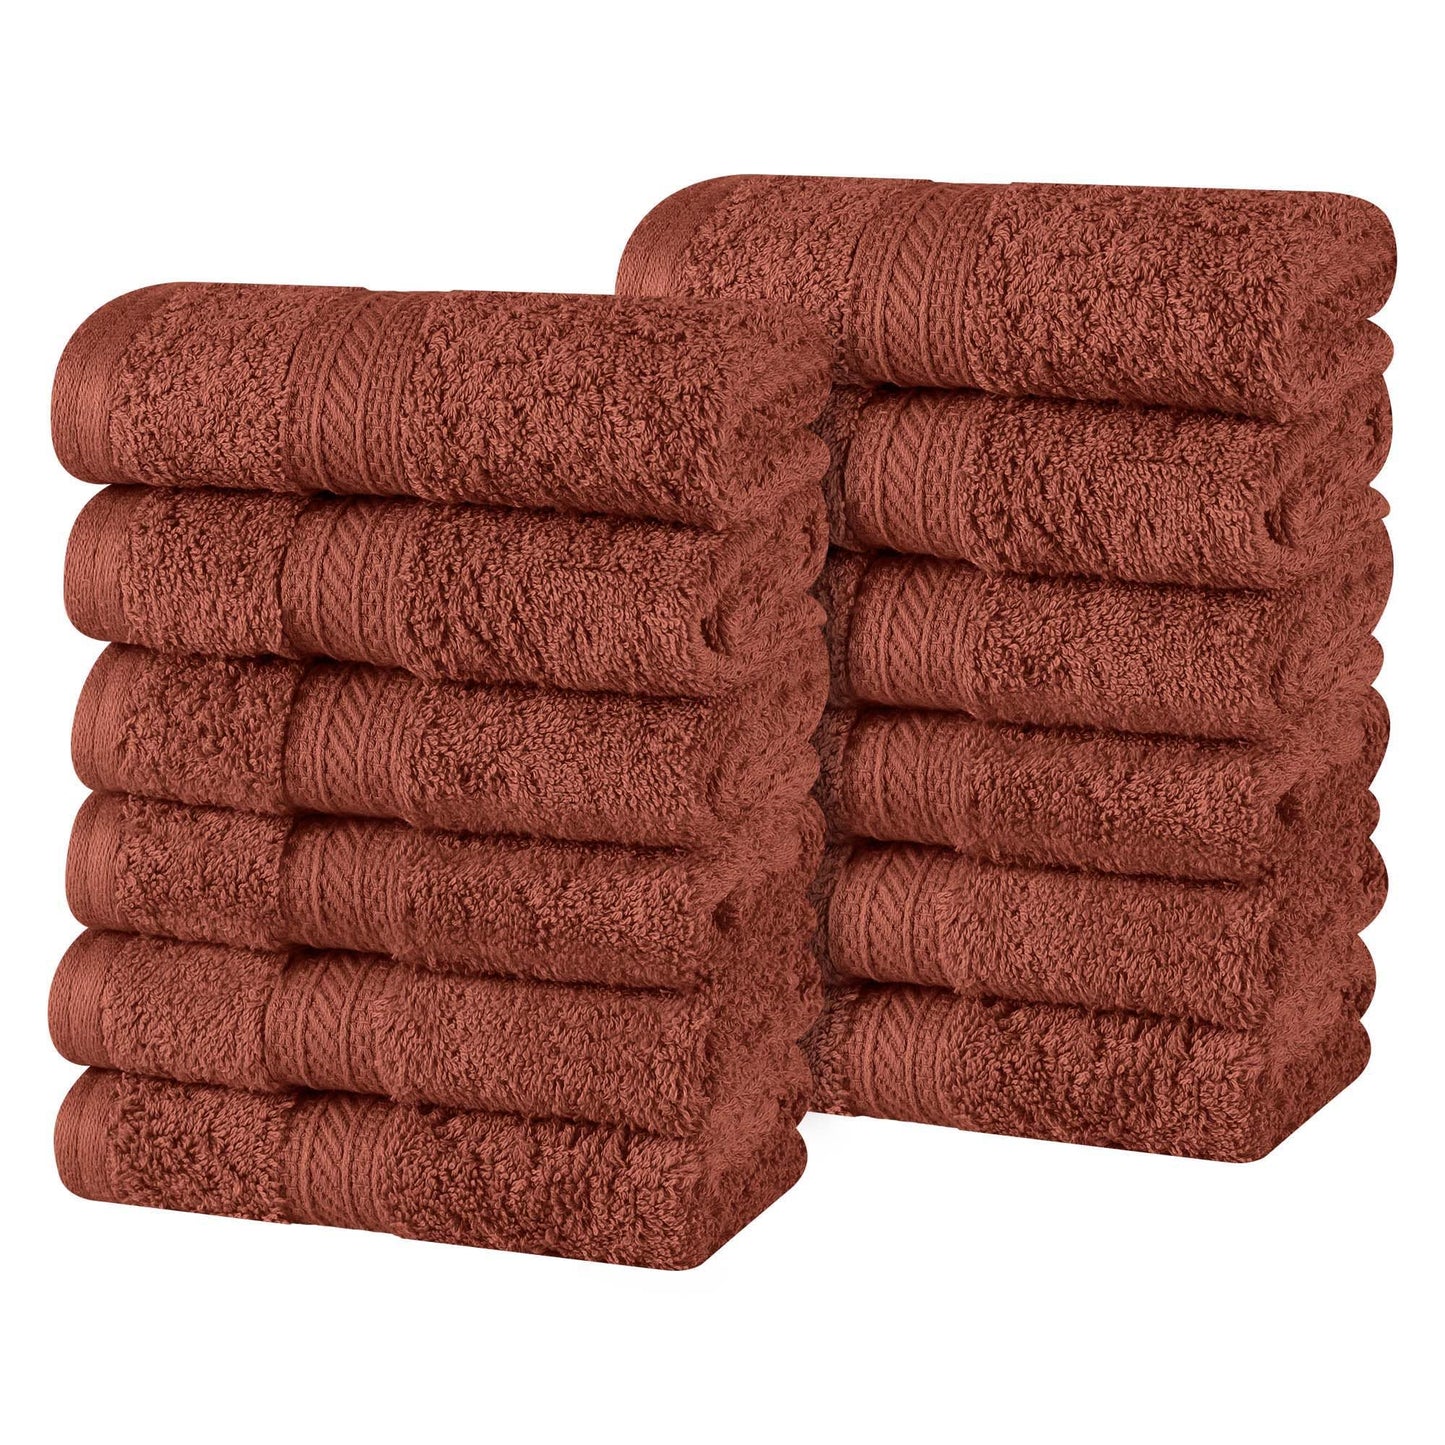 Superior Cotton Face Towels/Washcloth Set of 12, Home Essentials, Quick Dry, Luxury Bathroom Accessories, Basic Towels, Spa, Salon, Hotel, Resort, Thick, Ultra-Plush, Highly Absorbent, Hot Chocolate